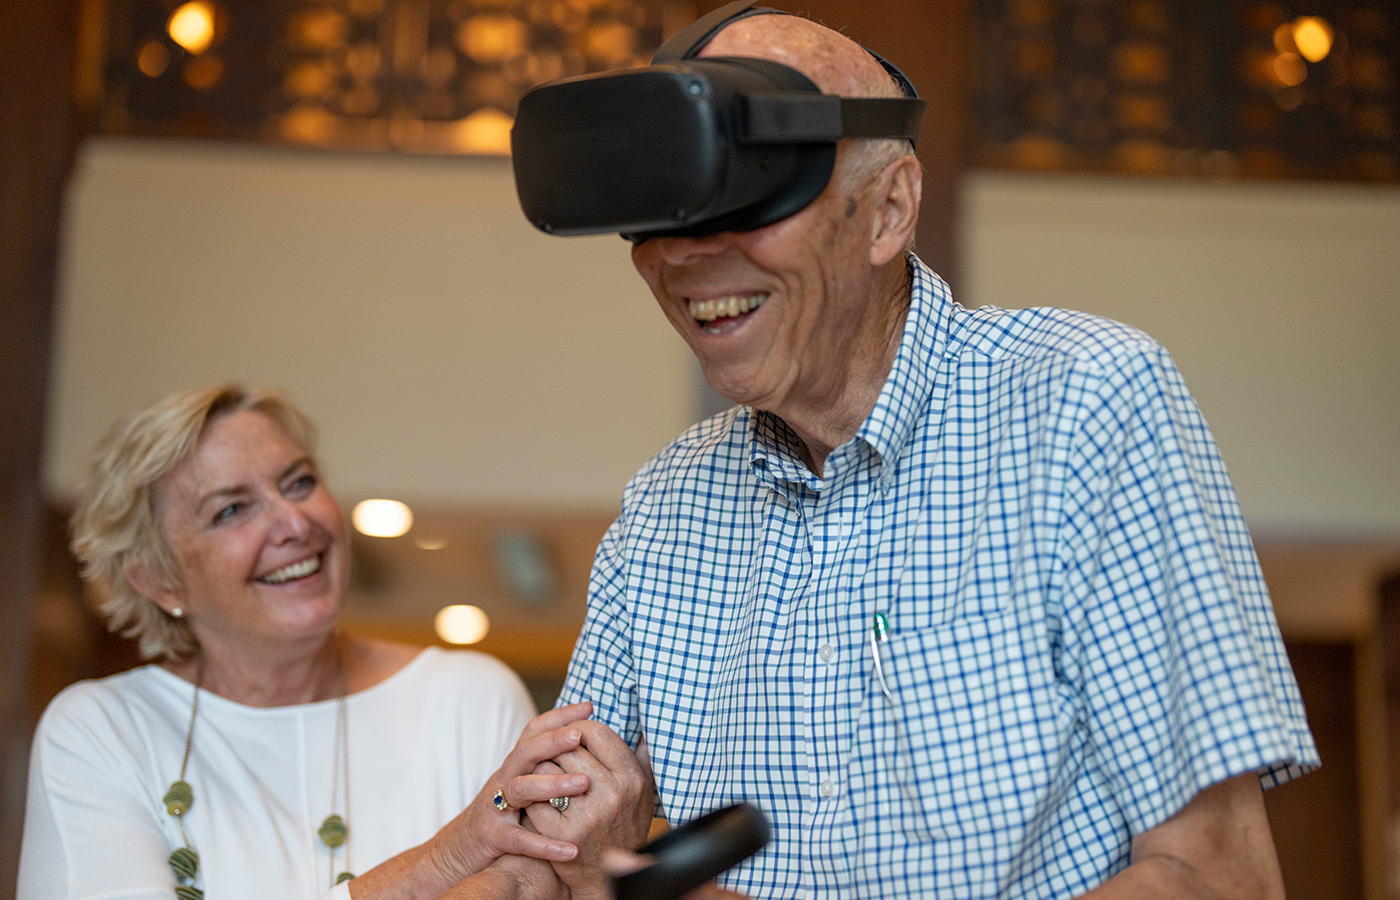 A resident using an EngageVR headset.